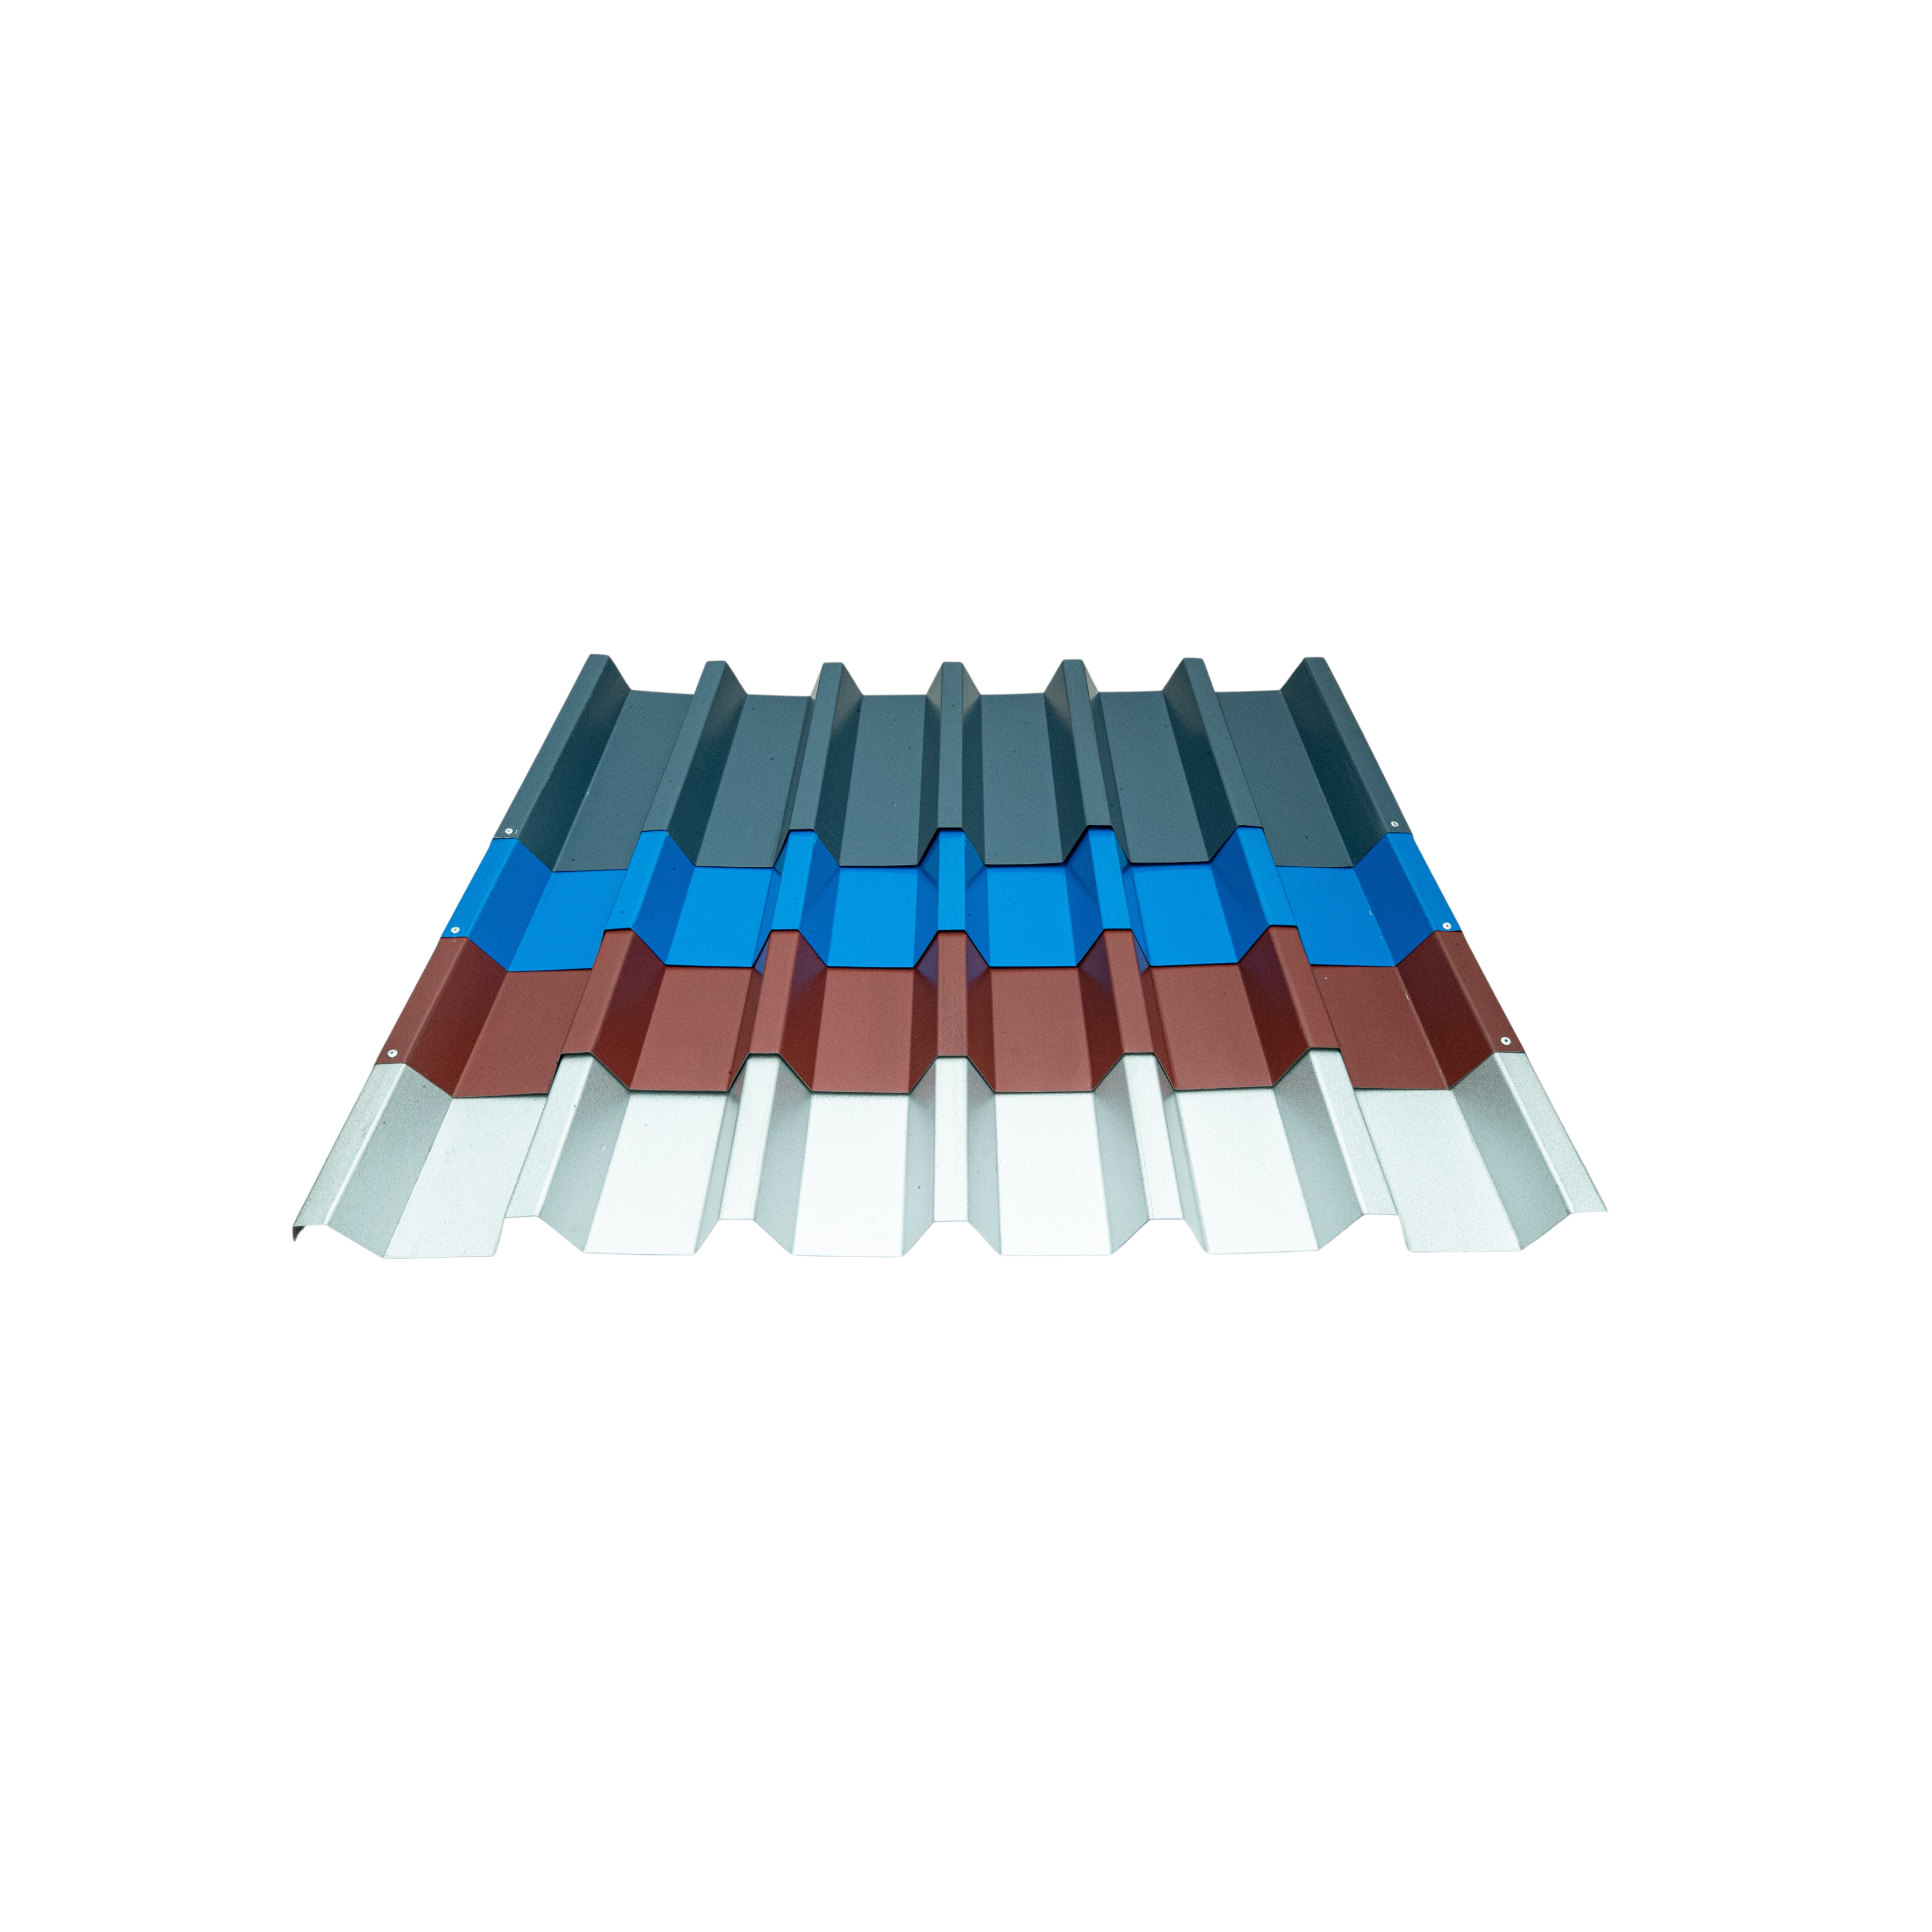 Industrial Roofing Sheet